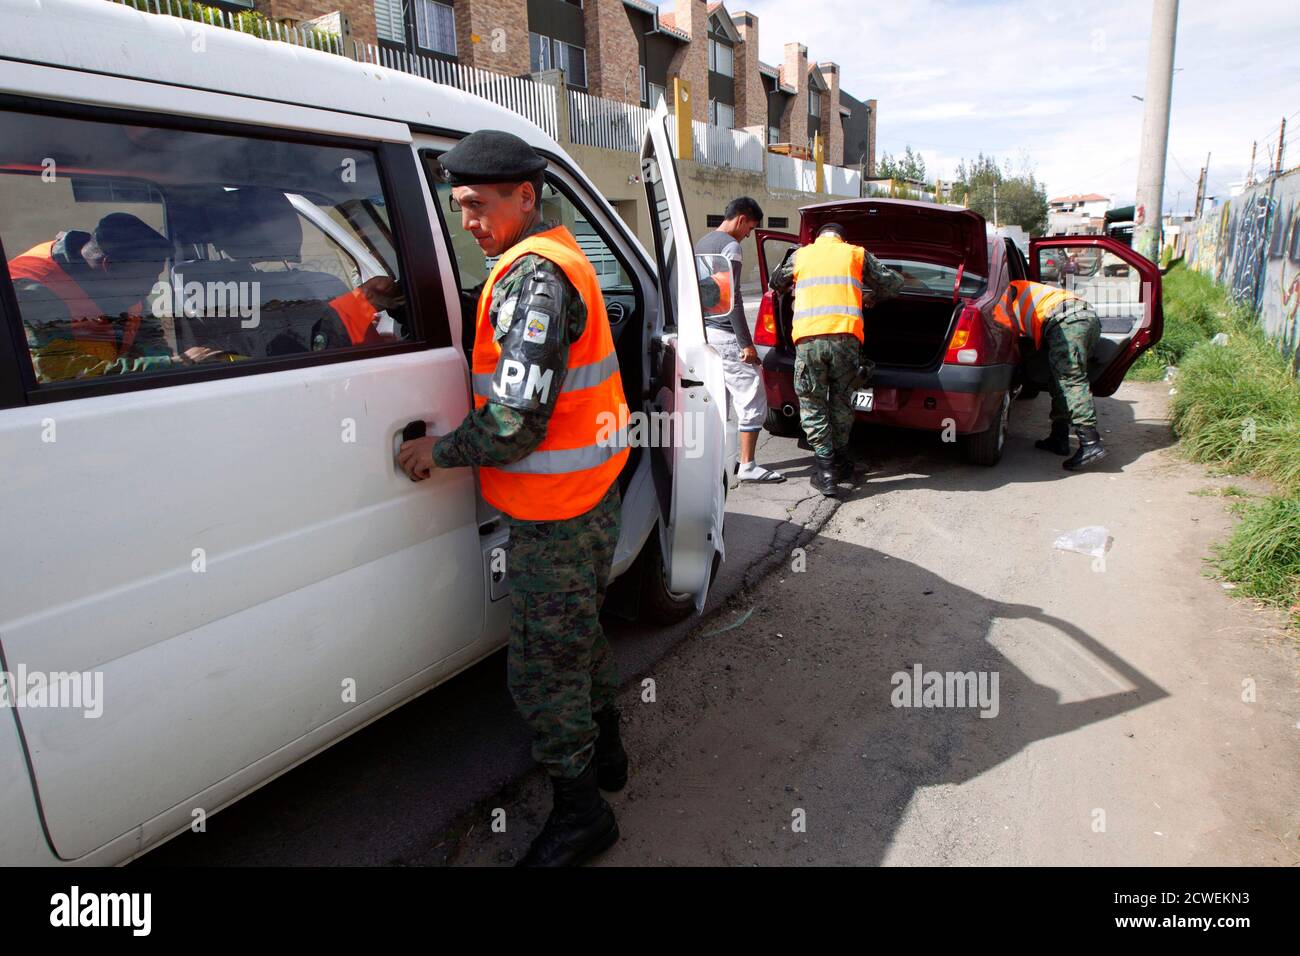 Ecuadorian military soldiers search a vehicle on a street in Quito January 28, 2015. Ecuadorian Army perform vehicle searches on the streets in an effort to assist the police in reducing crime in the country. REUTERS/Guillermo Granja (ECUADOR - Tags: MILITARY CRIME LAW POLITICS) Stock Photo